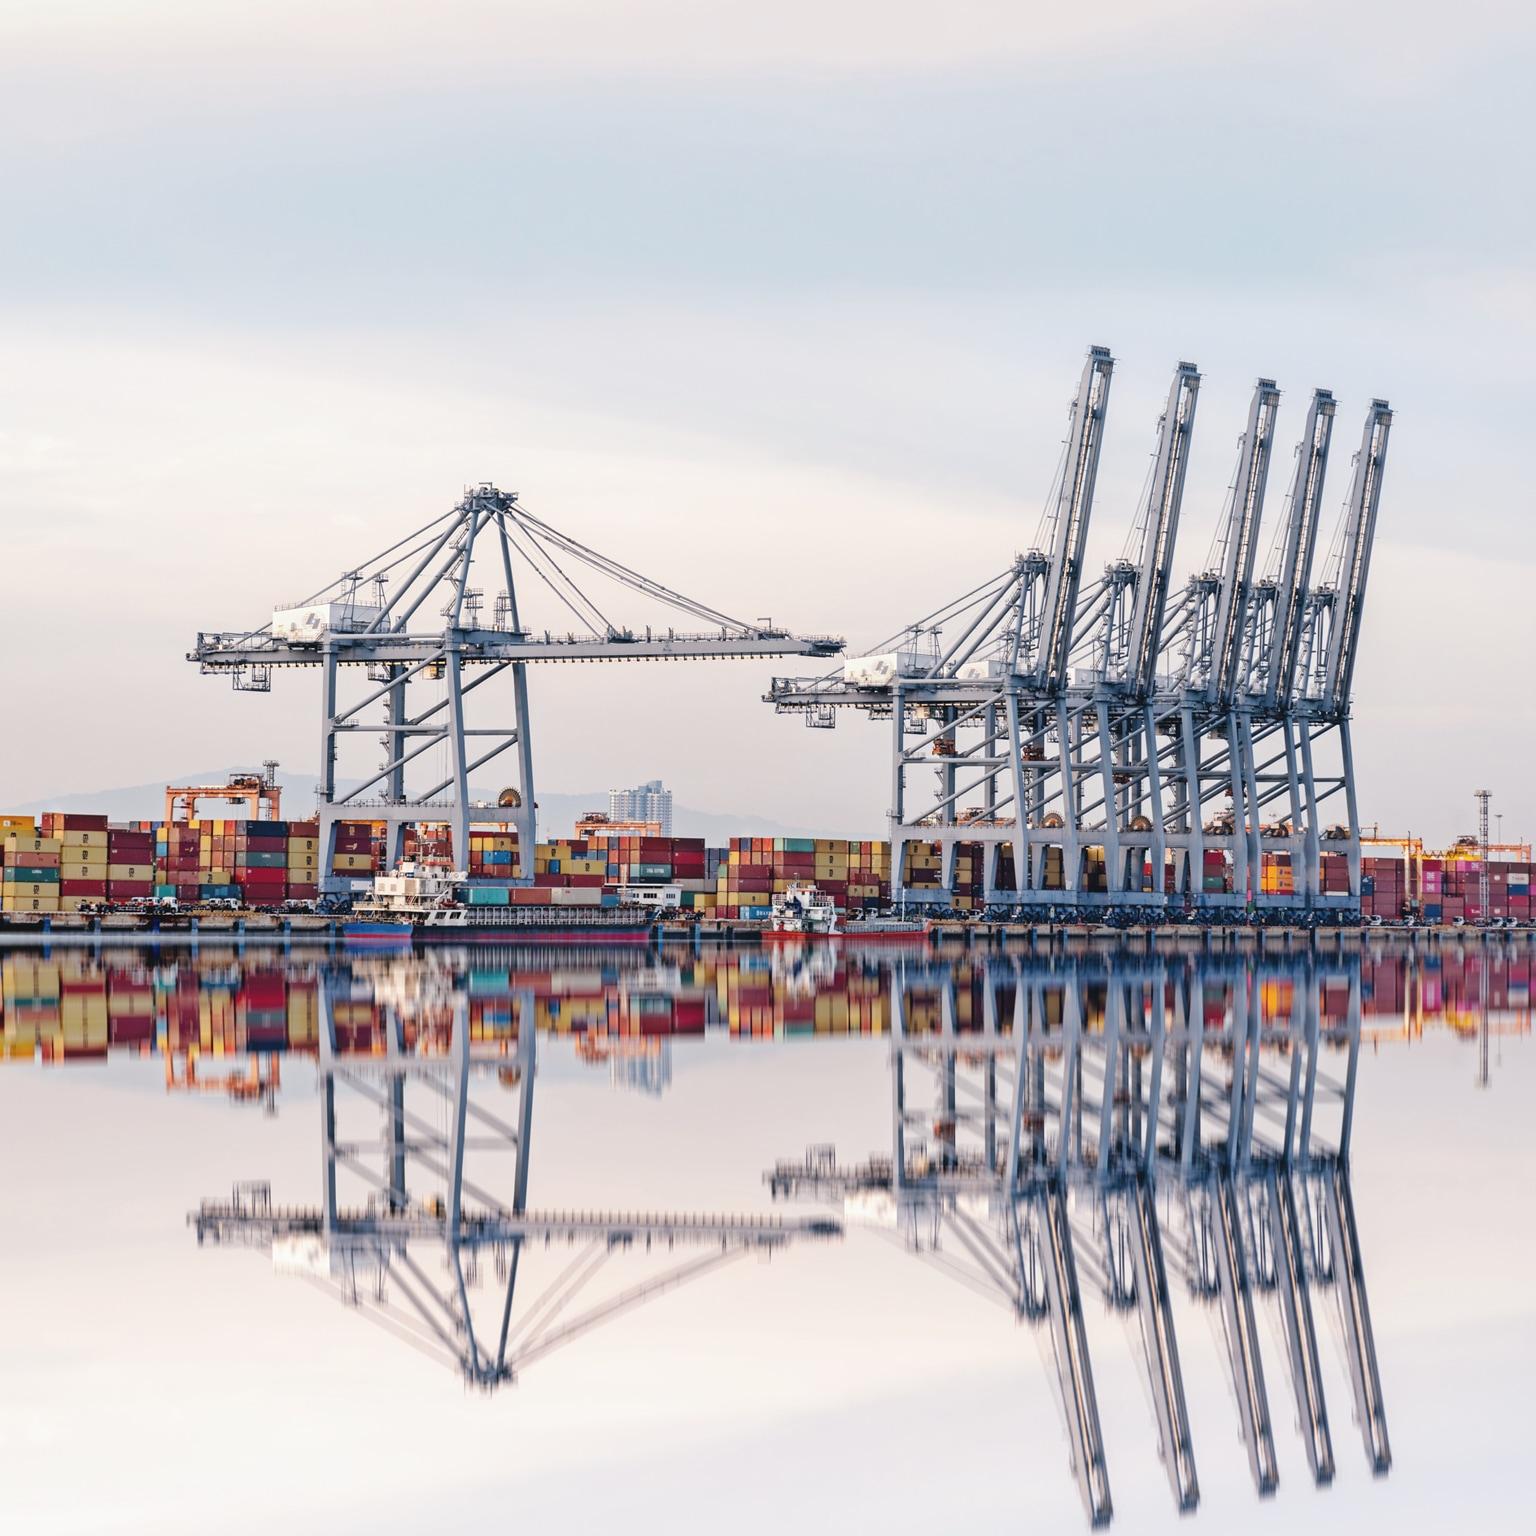 Image for Supply-chain resilience: Is there a holy grail? | McKinsey